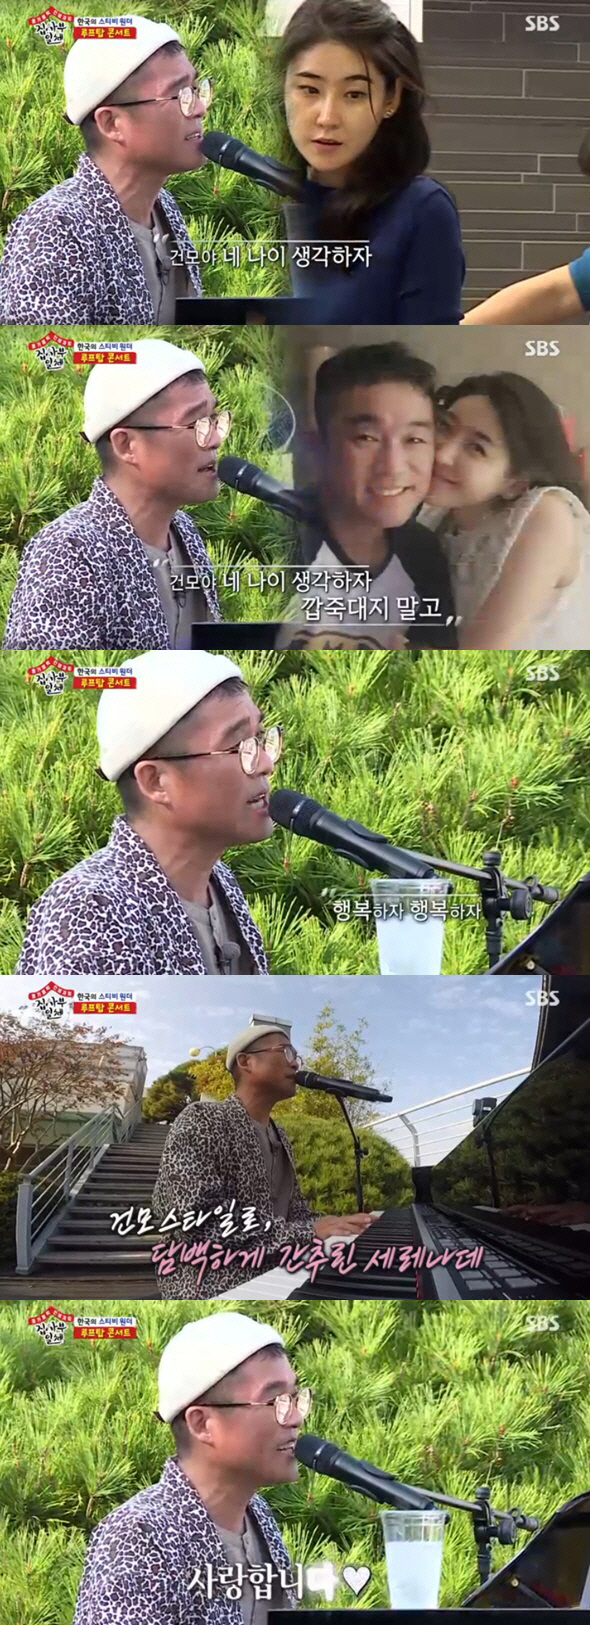 Lets be happy and dont get sick, Kim Gun-mo said, as she delivered a sweet Serenade to the bride-to-be.SBS entertainment program All The Butlers broadcasted on the 10th was broadcast on Kim Gun-mo master after last week.Kim Gun-mos special Housewarming, who moved into the new home, entertained viewers.Kim Gun-mo, along with members of All The Butlers, turned the rice cake to the neighbours around the new home.It was to express gratitude to the neighbors who agreed to the construction despite the damage such as noise due to the interior construction of the new house.Especially, this rice cake was more meaningful because it was made by pianist Jang Ji Younn, a pre-priest.Jang Ji Younn was caught on the camera and collected his attention.The members pressed each doorbell of their neighbors house and delivered rice cake, and the neighbors responded with a warm smile.After turning the rice cake, Kim Gun-mo opened a Music classroom for members; the key message in the Kim Gun-mo table Music classroom was: Music is play.The members admired the national singer One Point lesson, saying, This is a class for how much.Kim Gun-mo was an national singer and created a new melody with melodian with various Feelings, which gave the members an admiration.Kim Gun-mo said, If something comes into my head, I will do music properly from that time. Music showed his musical philosophy of music is fun in a working way.Kim Gun-mo gave members musical instruments such as triangles and recorders to the members, saying, I want to deal with the instruments one by one. He started his hit song Excuse.Here, Yang Se-hyeongs sensible beatbox and Lee Seung-gis vocals were added to complete the excuse of a different feeling.Kim Gun-mo was also pleased with the members who enjoyed Music.The highlight of Housewarming was Kim Gun-mos Rooftop Mini Live concert.Kim Gun-mo was a 100% musician who collected a playful game and sat in front of the piano and showed sweet music.I was singing a hit song medley such as Im sorry and Beautiful farewell Seoul Moon , and all the members who listened to it could not hide their thrilling expression.I have been suffering so far to listen to this song, he confessed to his heart and laughed.Kim Gun-mo called Lee Seung-gis My Girl at the end of the day.The song was I am happy, I am happy, I am not sick, I do not eat food, I do not eat it, and I love you, which sounded like a love serenade to the bride-to-be Jang Ji Youn.Meanwhile, Kim Gun-mo and Jang Ji Younn will be married at the Seoul Motivation on January 30 next year.The two men met with the introduction of their acquaintances last winter and found that they had grown love for a year.